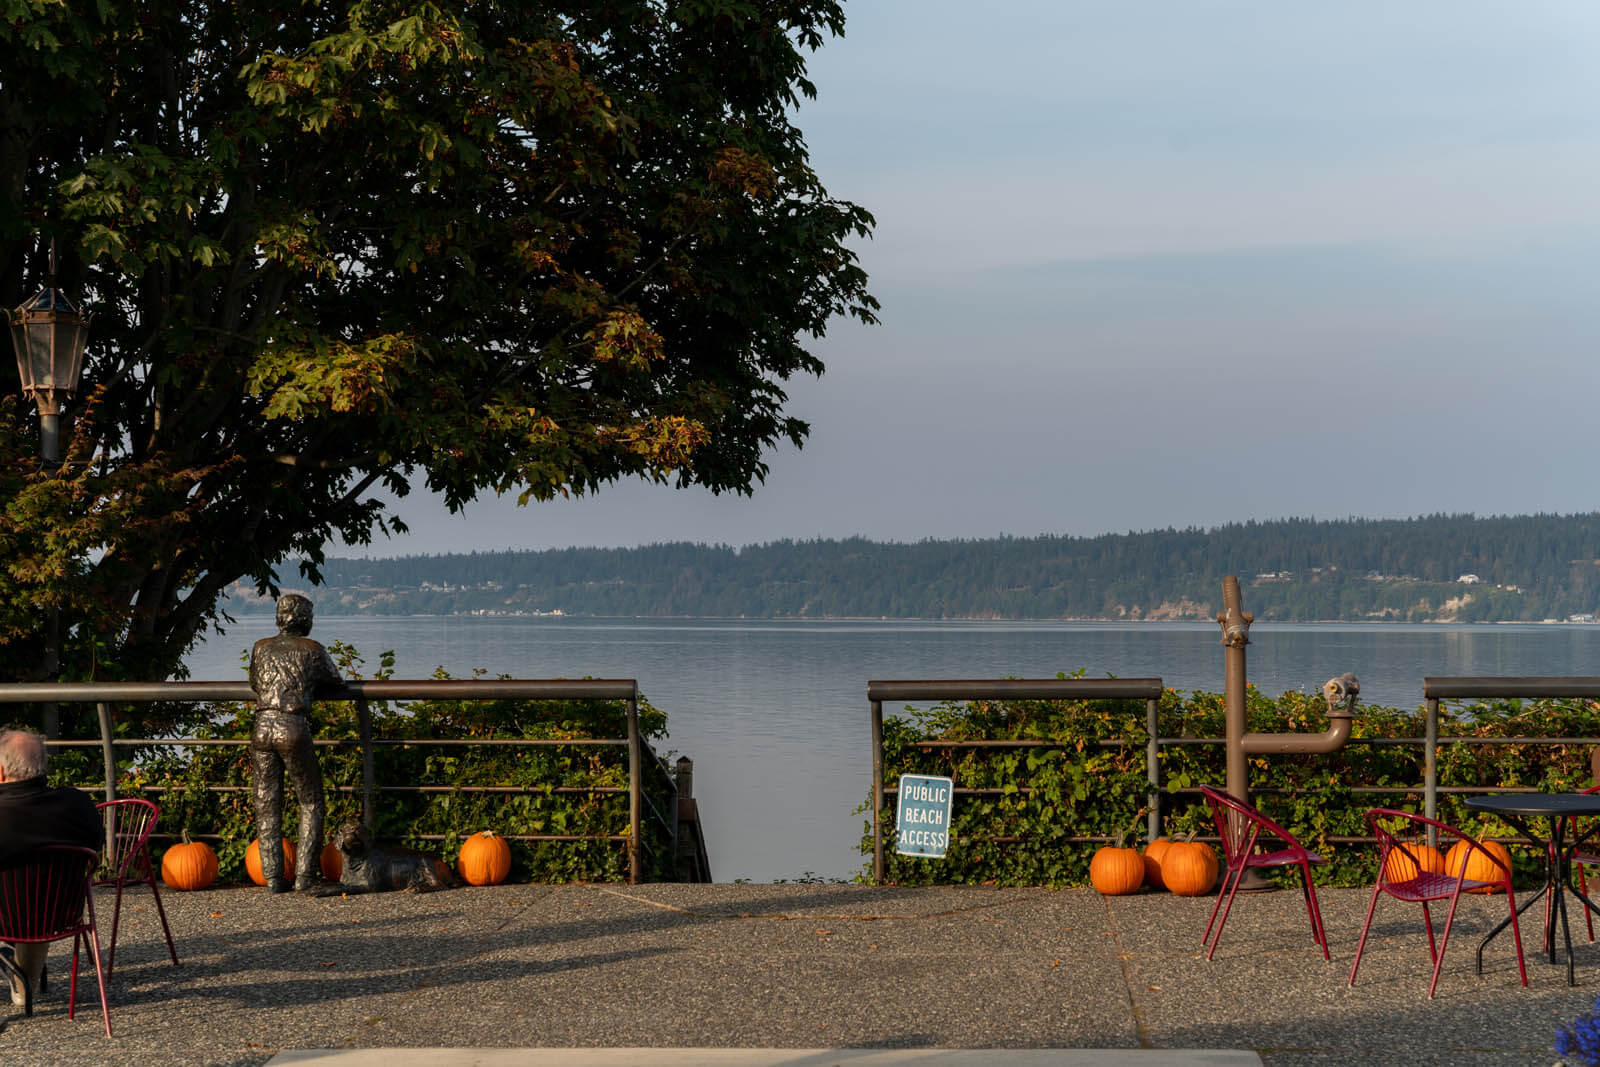 view of the waterfront in Langley, Washington on Whidbey Island